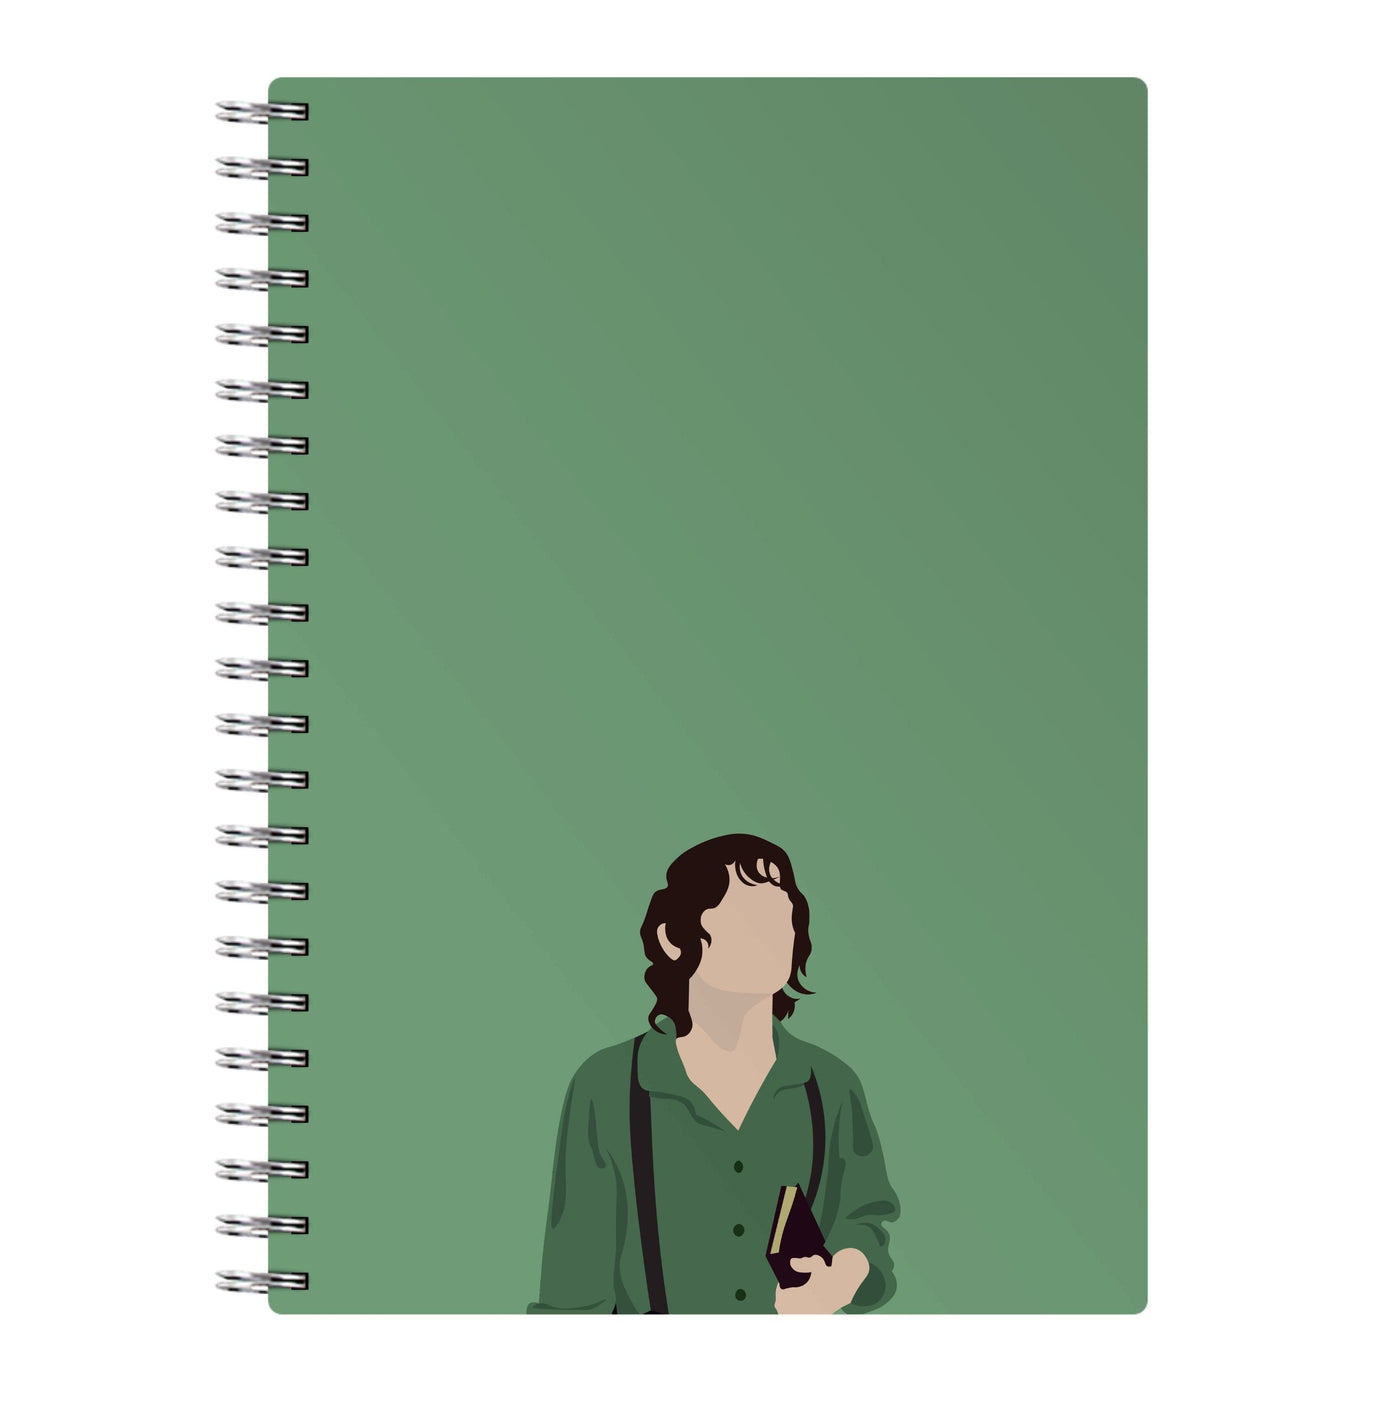 Frodo Baggings - Lord Of The Rings Notebook